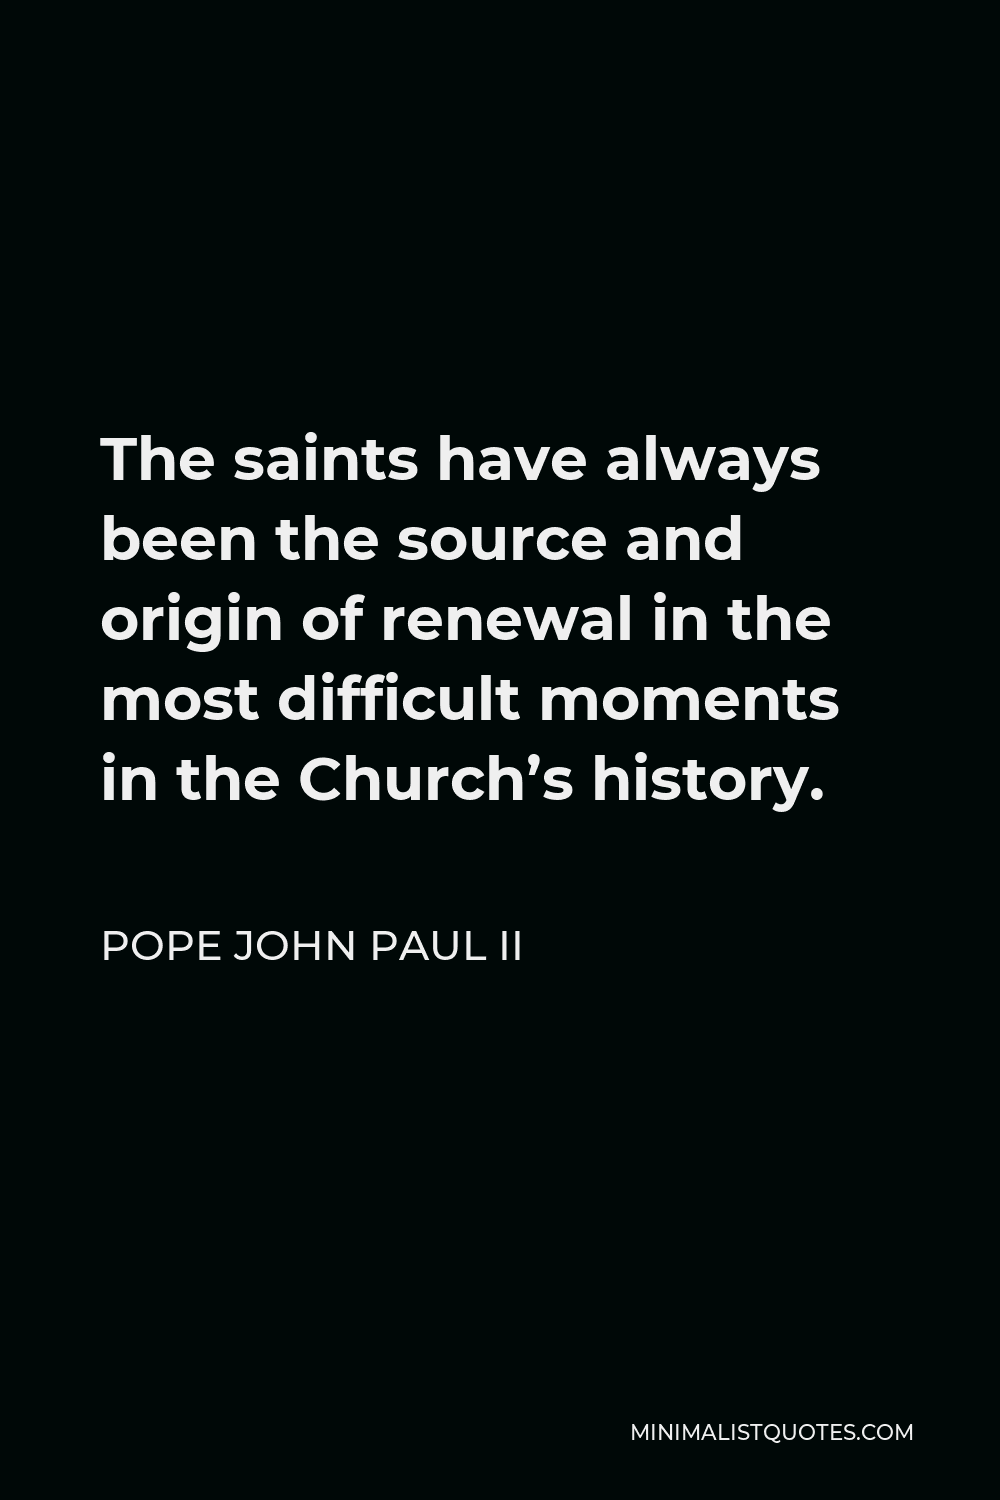 Pope John Paul II Quote - The saints have always been the source and origin of renewal in the most difficult moments in the Church’s history.